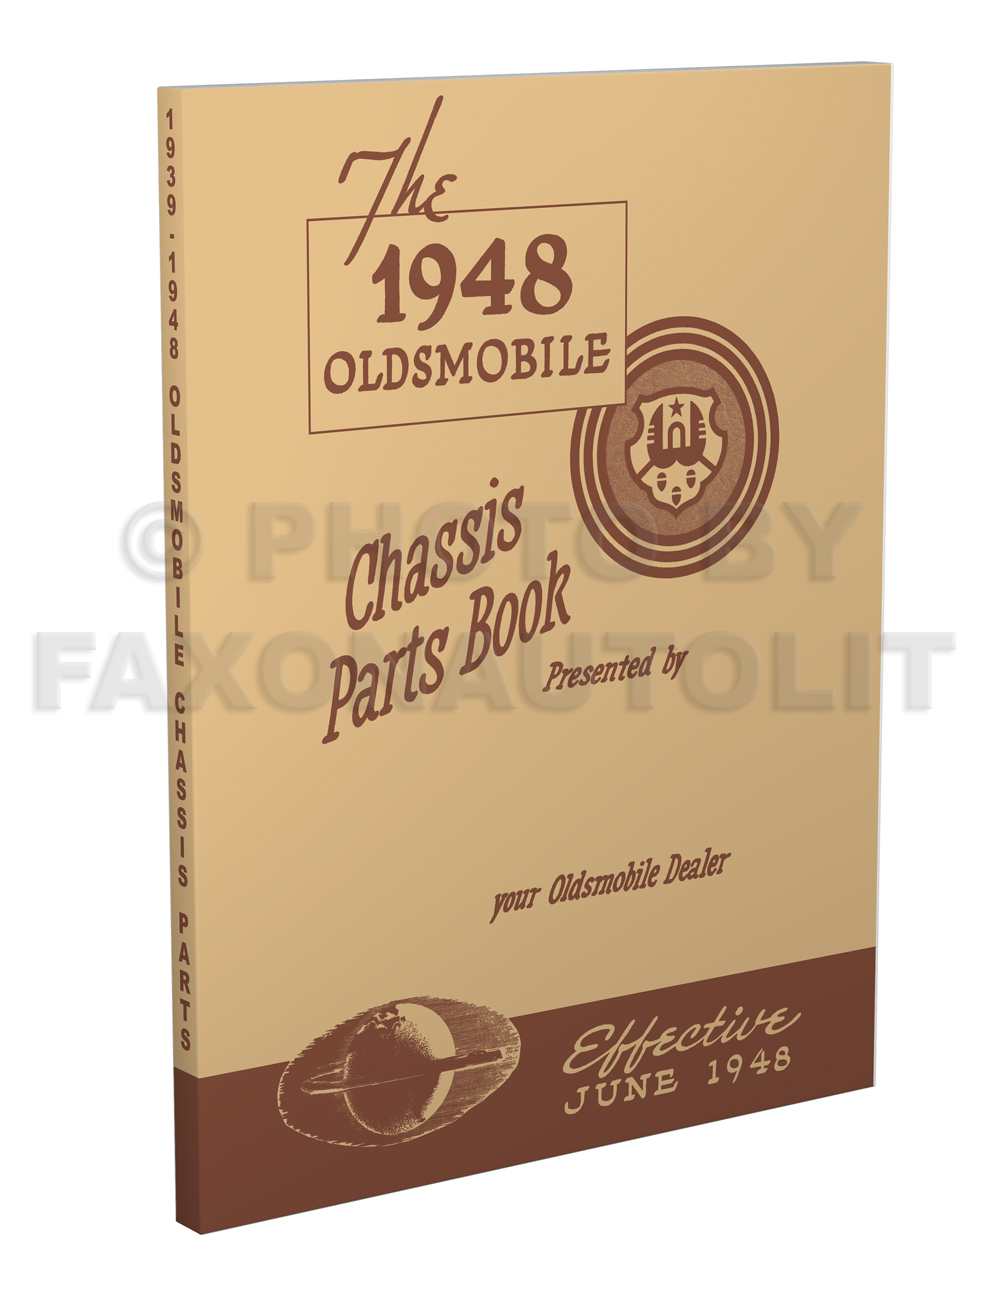 1939-1948 Oldsmobile Master Chassis Parts Book Reprint